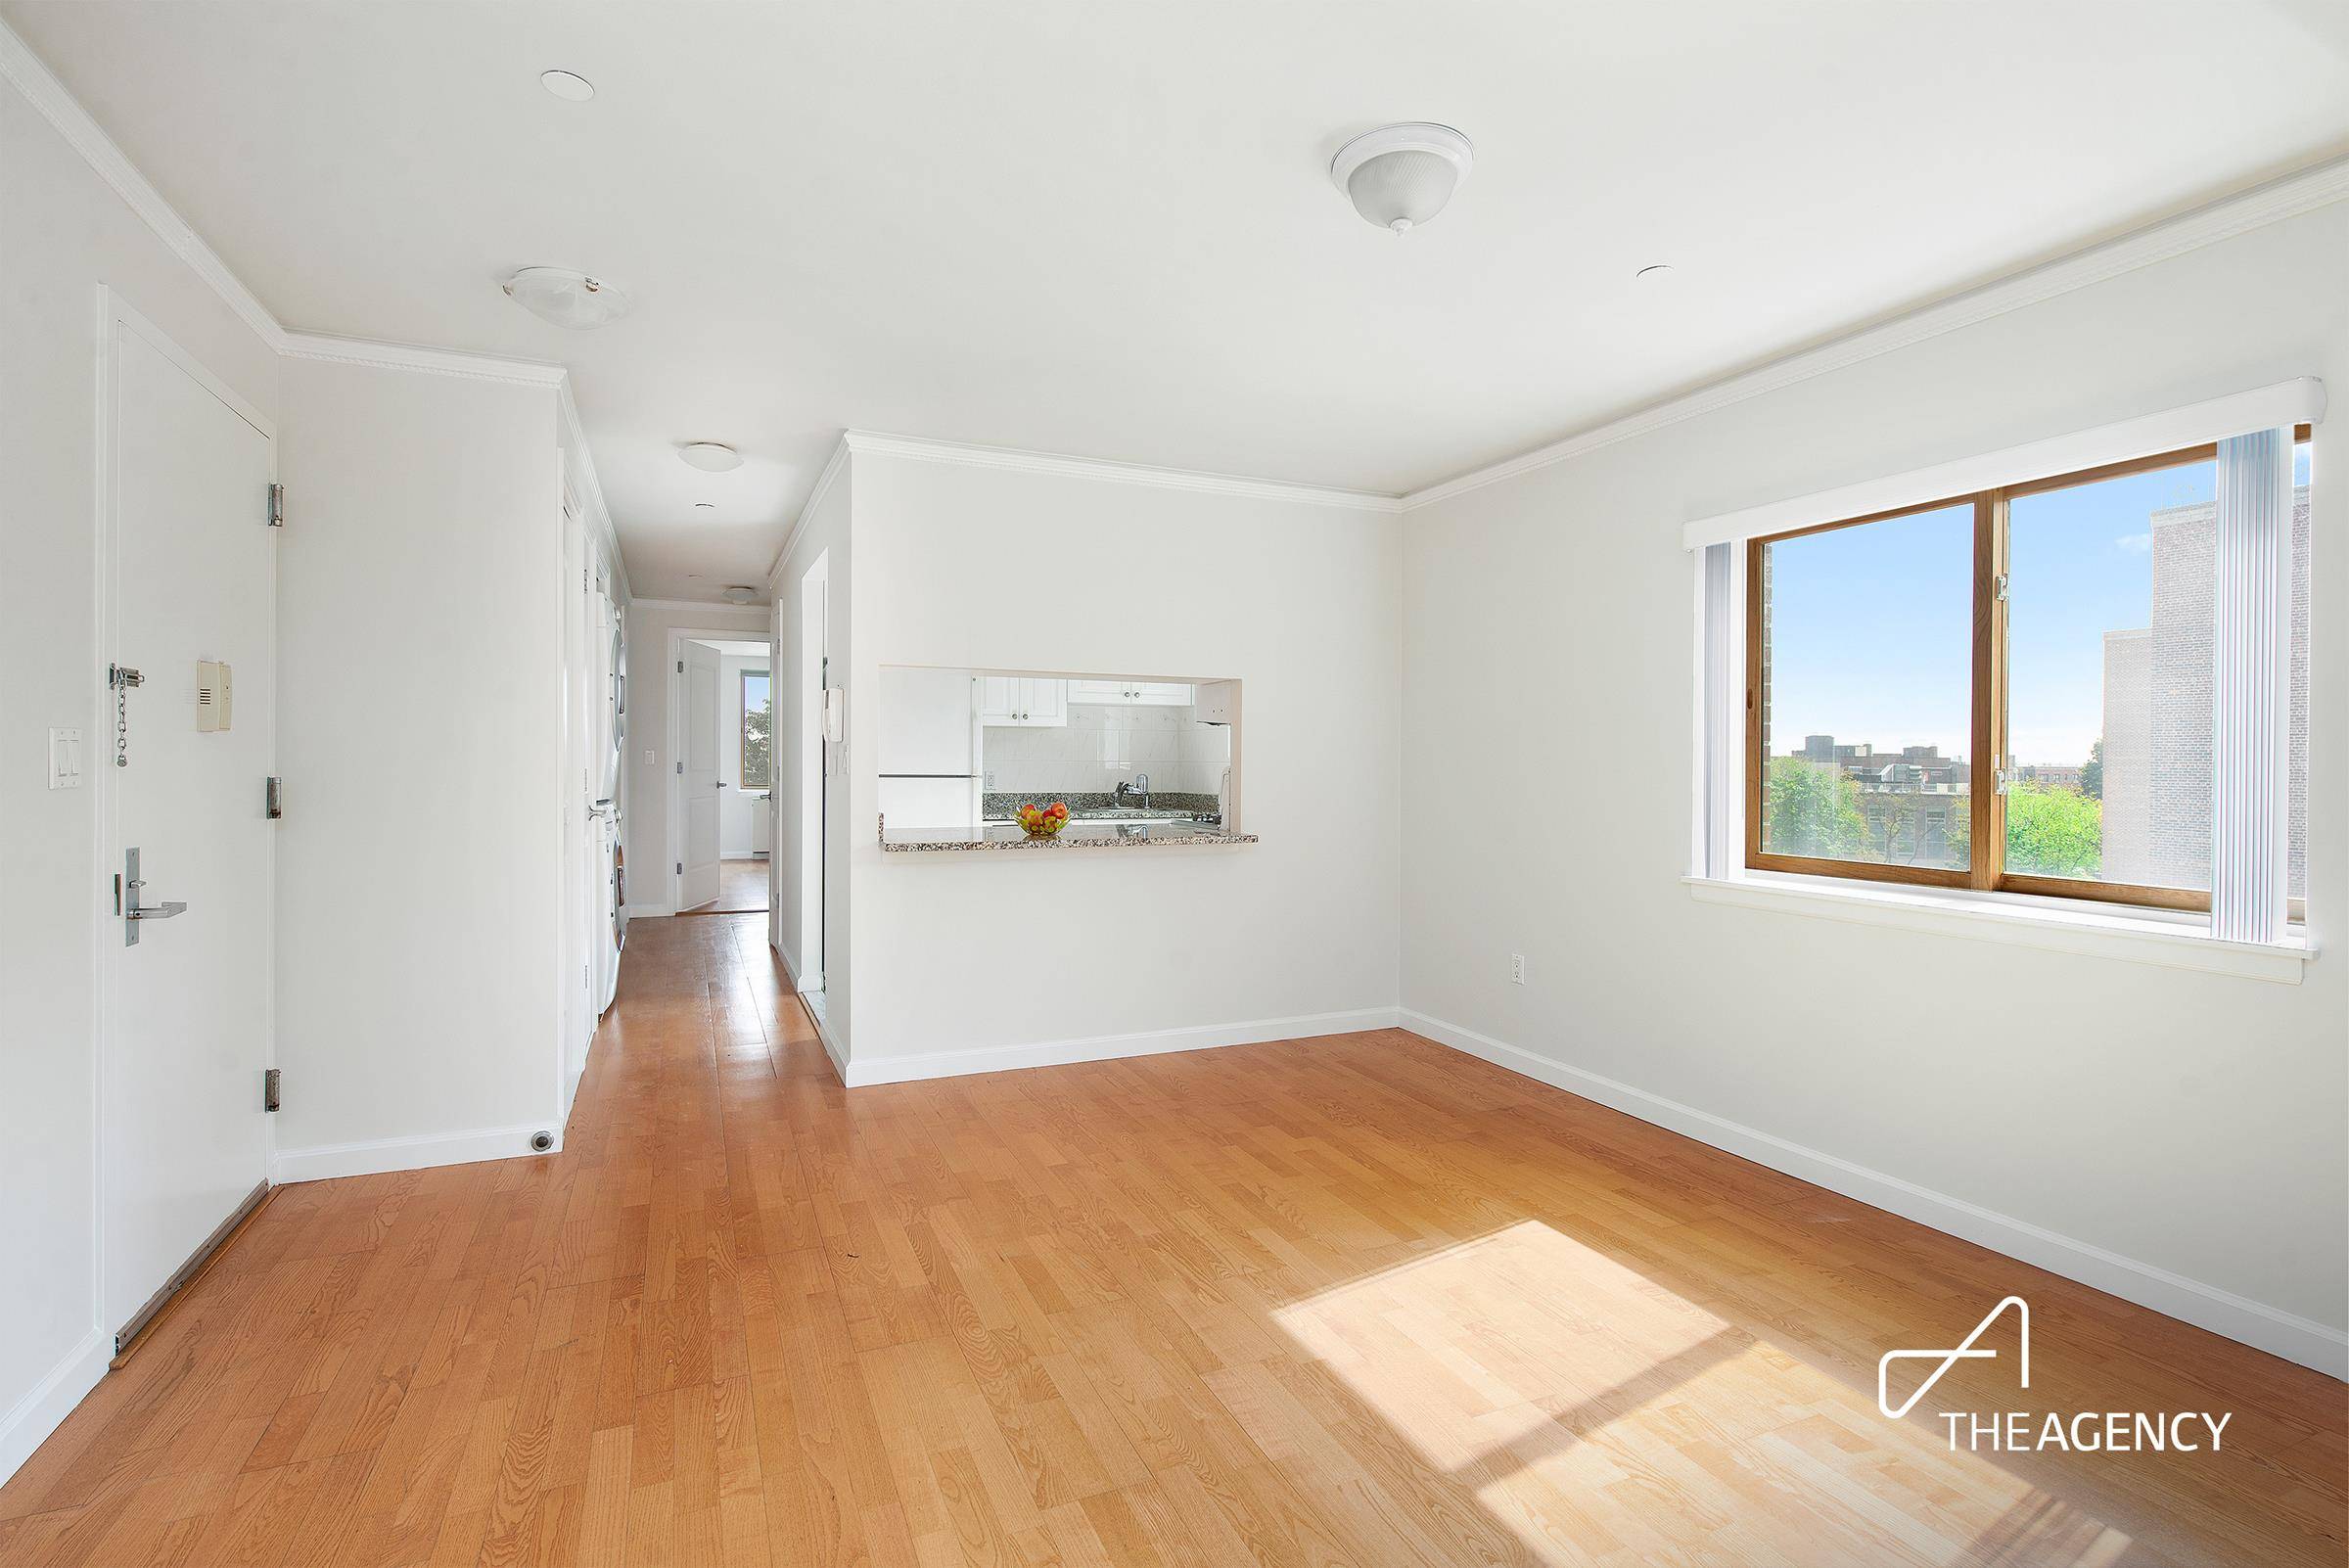 Let the sunshine in ! Cheerful and sunny 3 bedroom, 2 bath home offers a parking spot, washer dryer, storage and balcony in a quiet, boutique condo building.